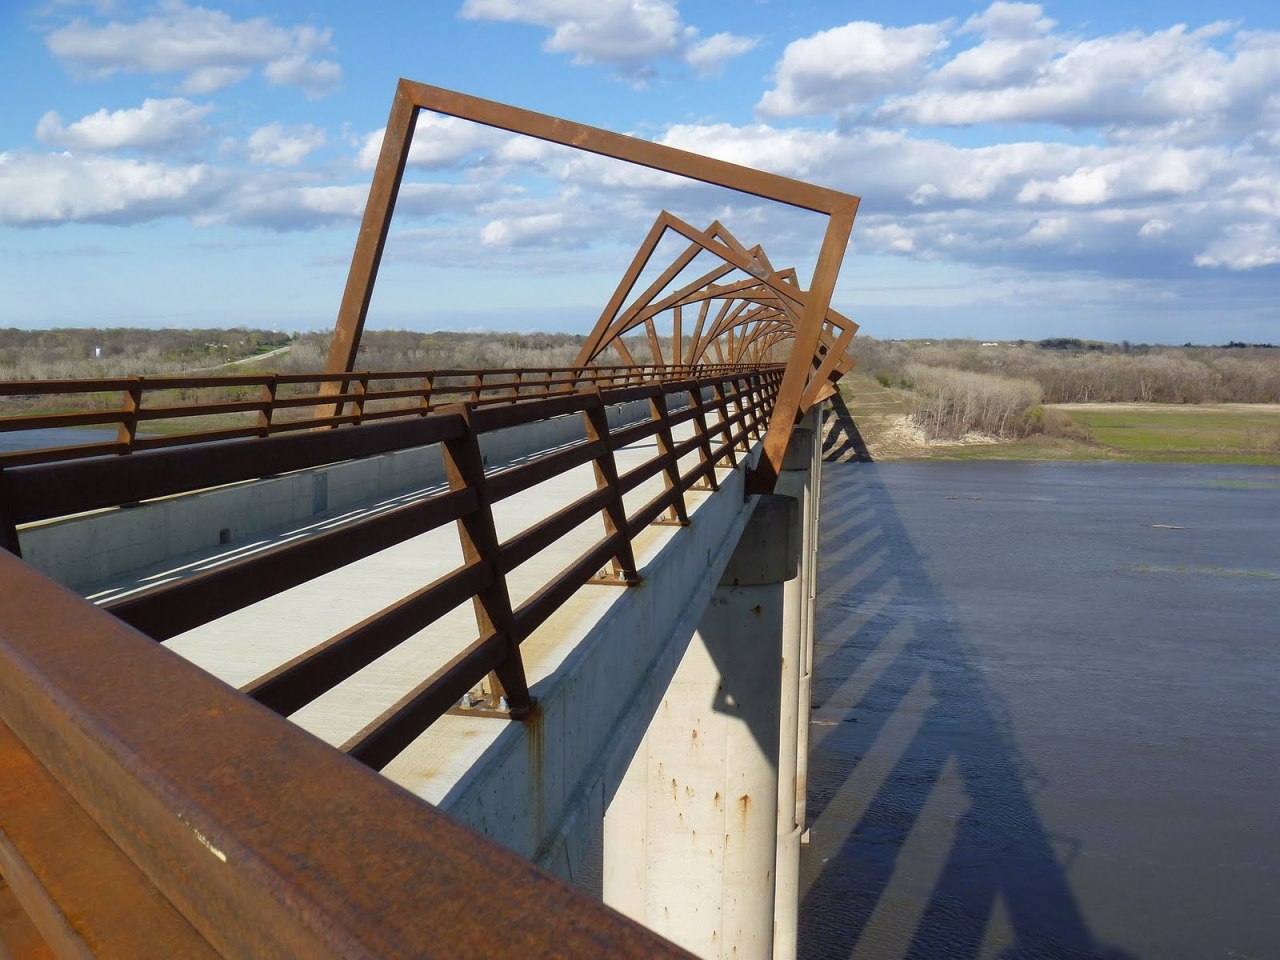 ombuarchitecture:Iowa High Trestle Bridge Spanning between the two rural communities